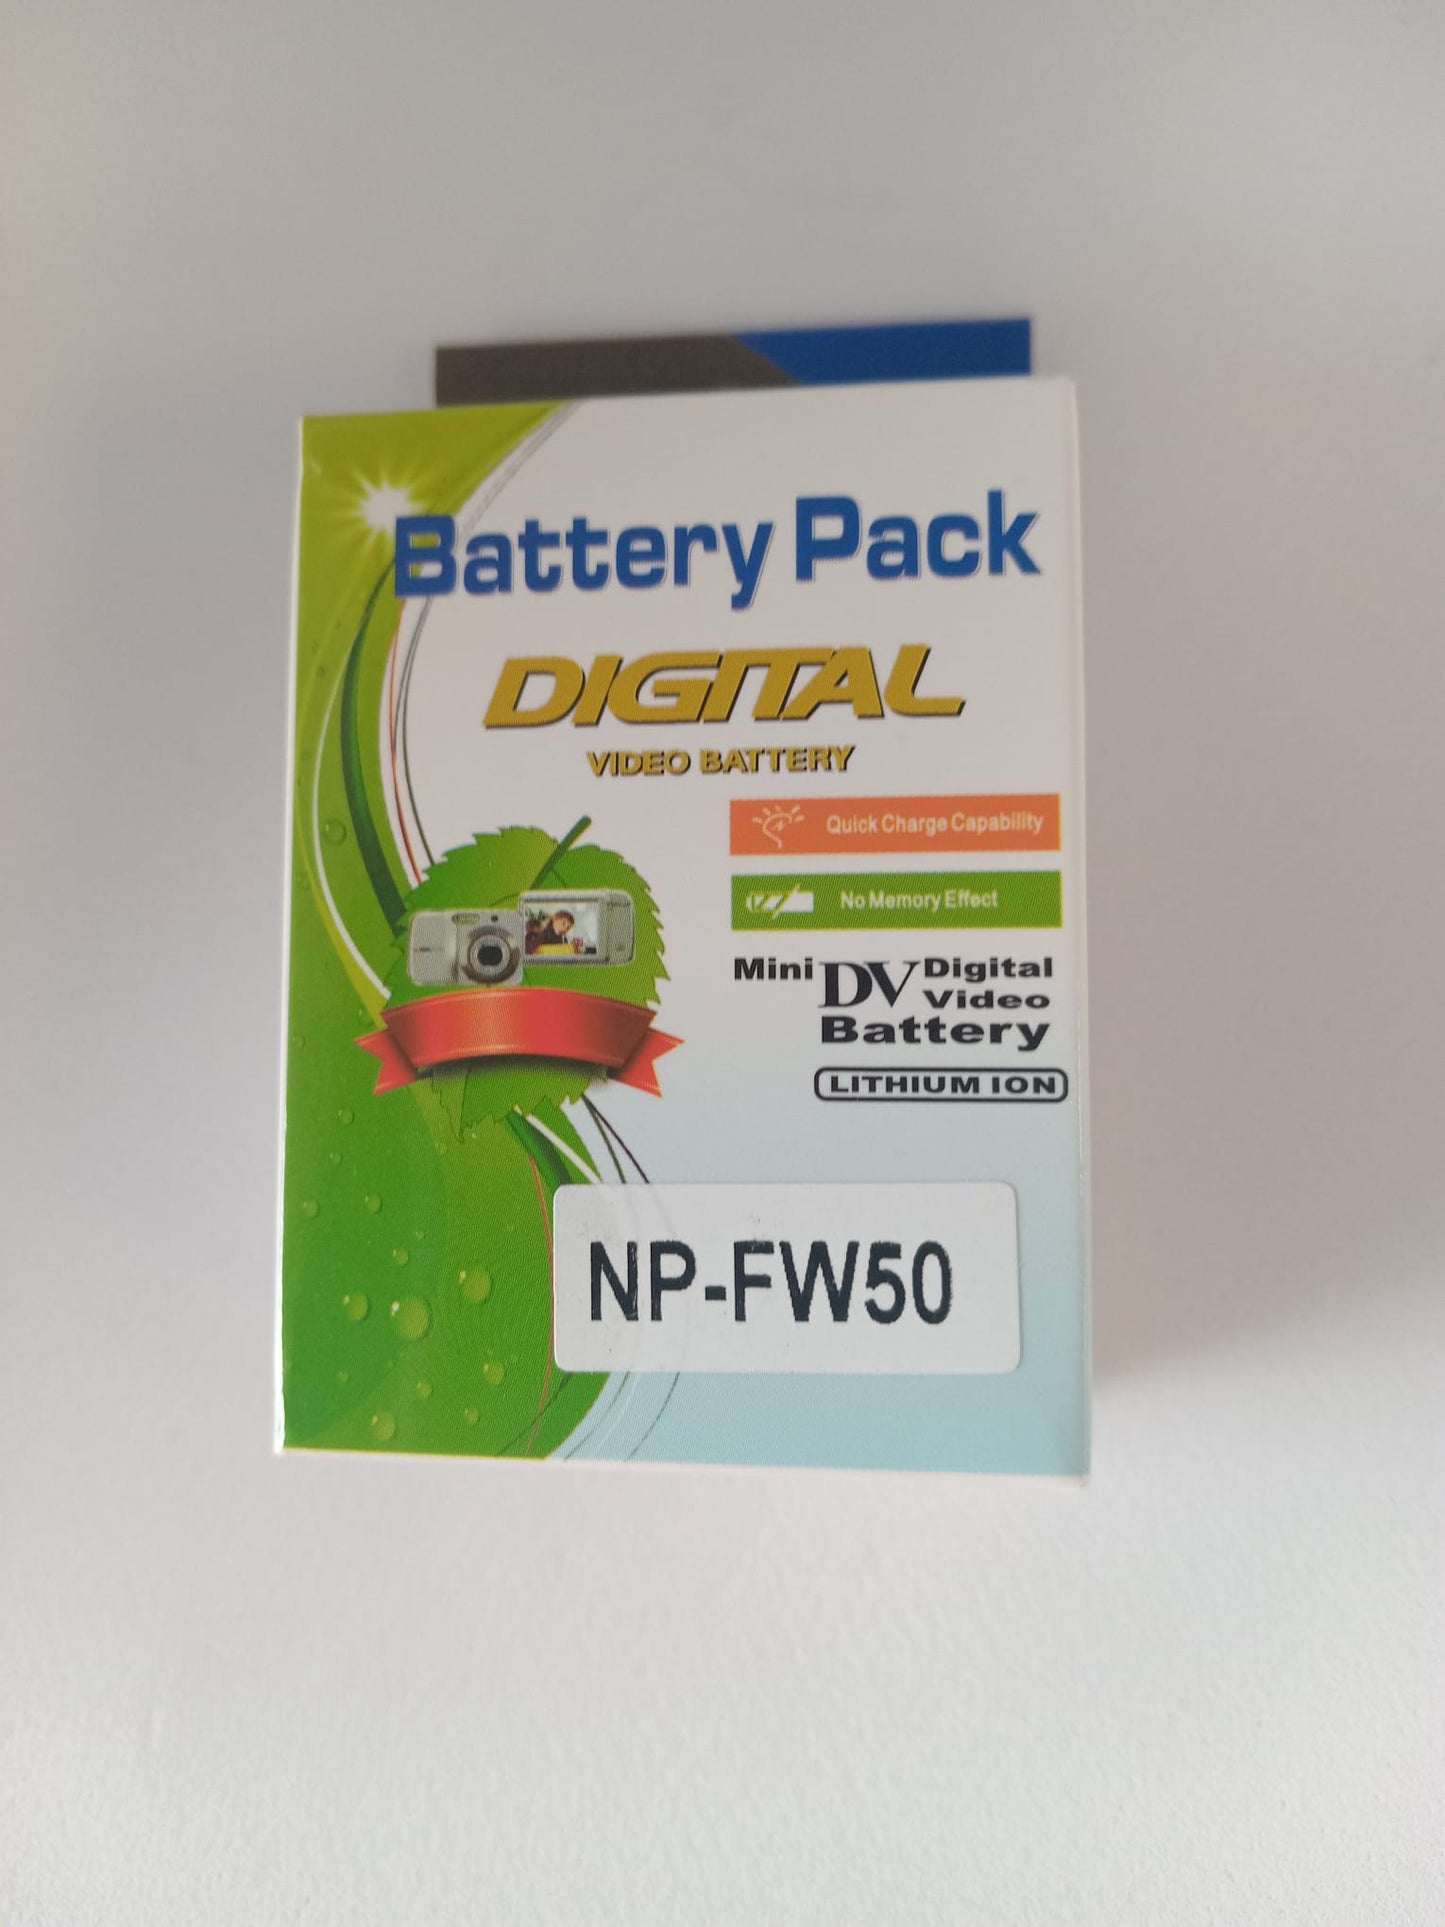 Digital video camera battery for NP-FW50